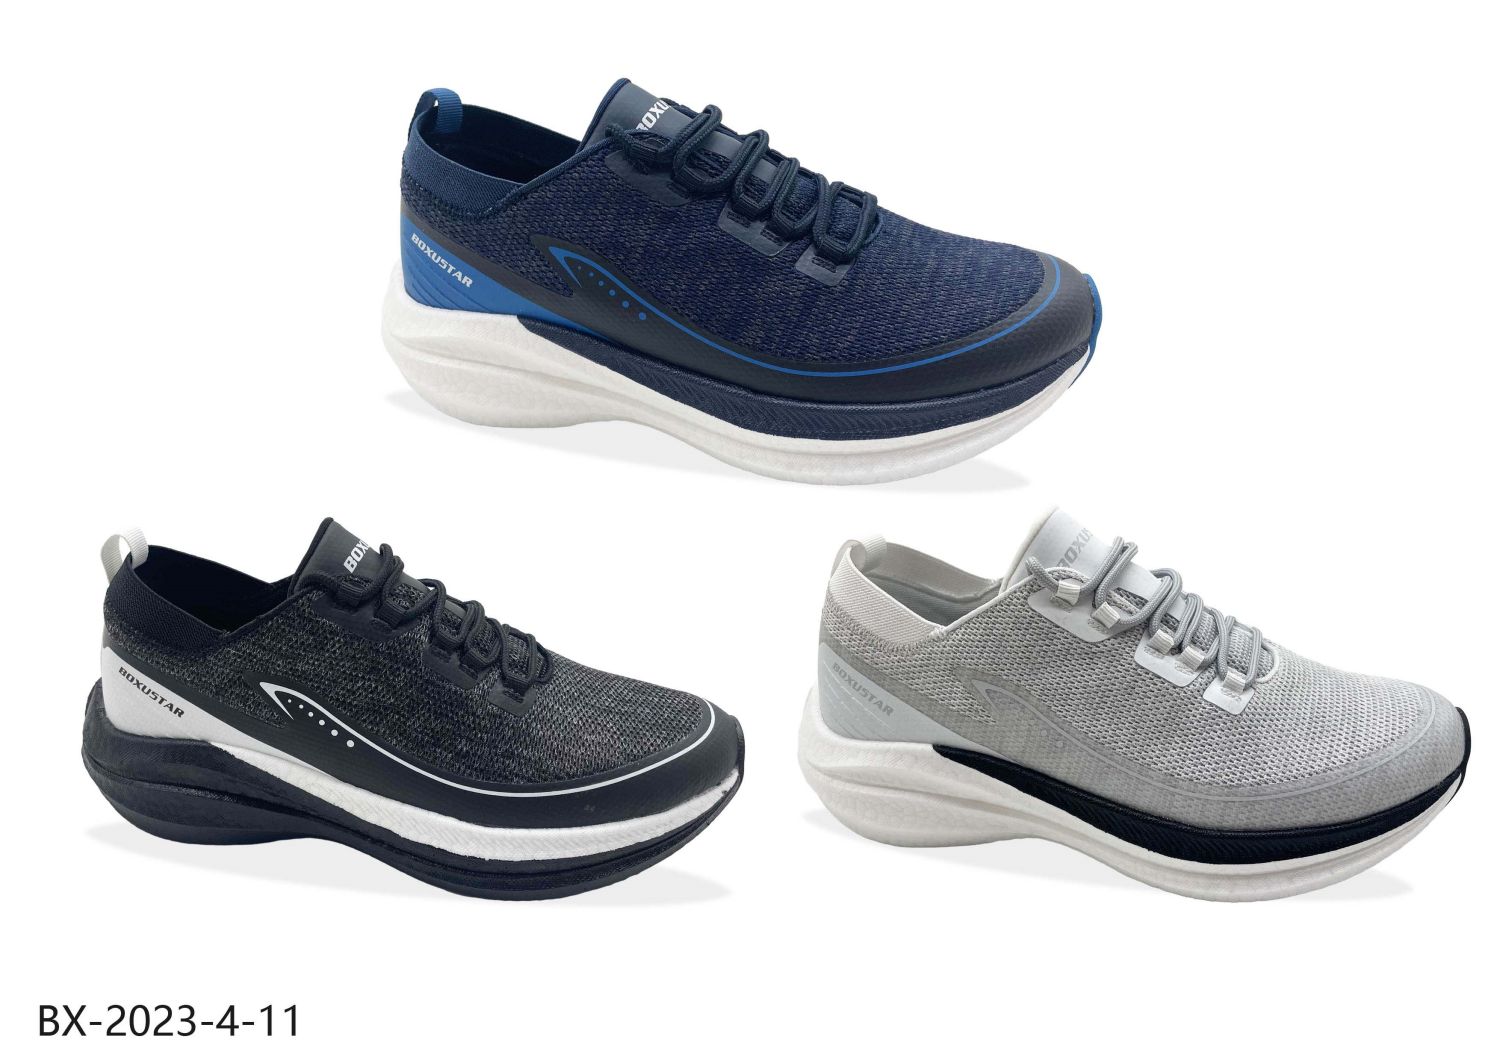 Running Shoe with flyknit upper ,tpu outsole Manufacturers, Running Shoe with flyknit upper ,tpu outsole Factory, Supply Running Shoe with flyknit upper ,tpu outsole